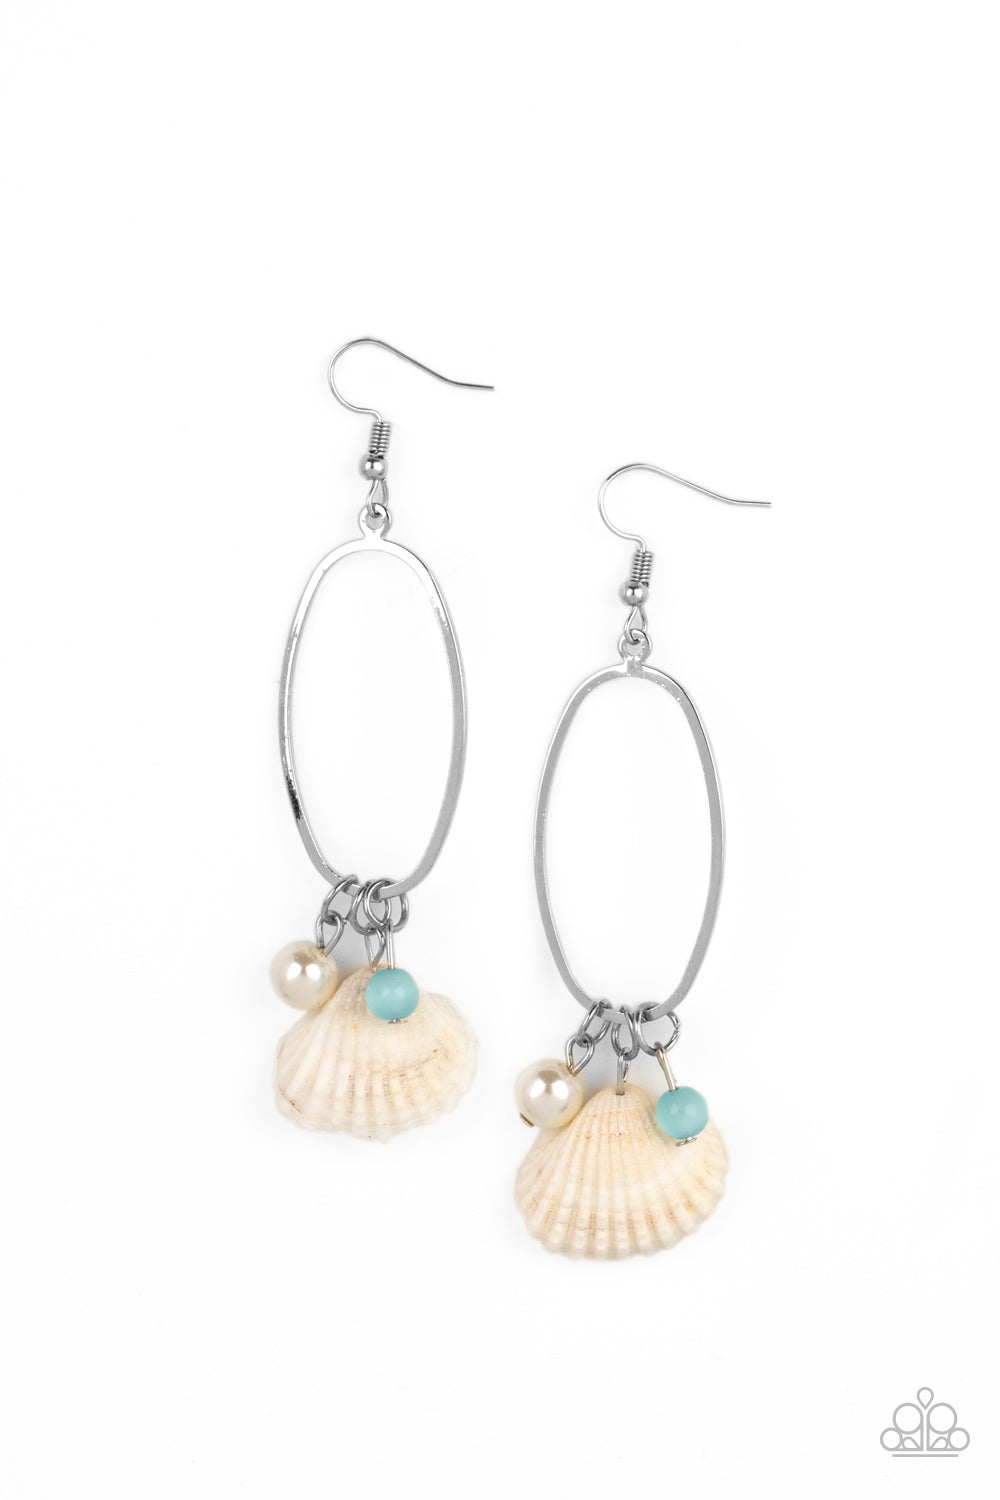 Paparazzi This Too SHELL Pass - Blue Earrings - A Finishing Touch Jewelry